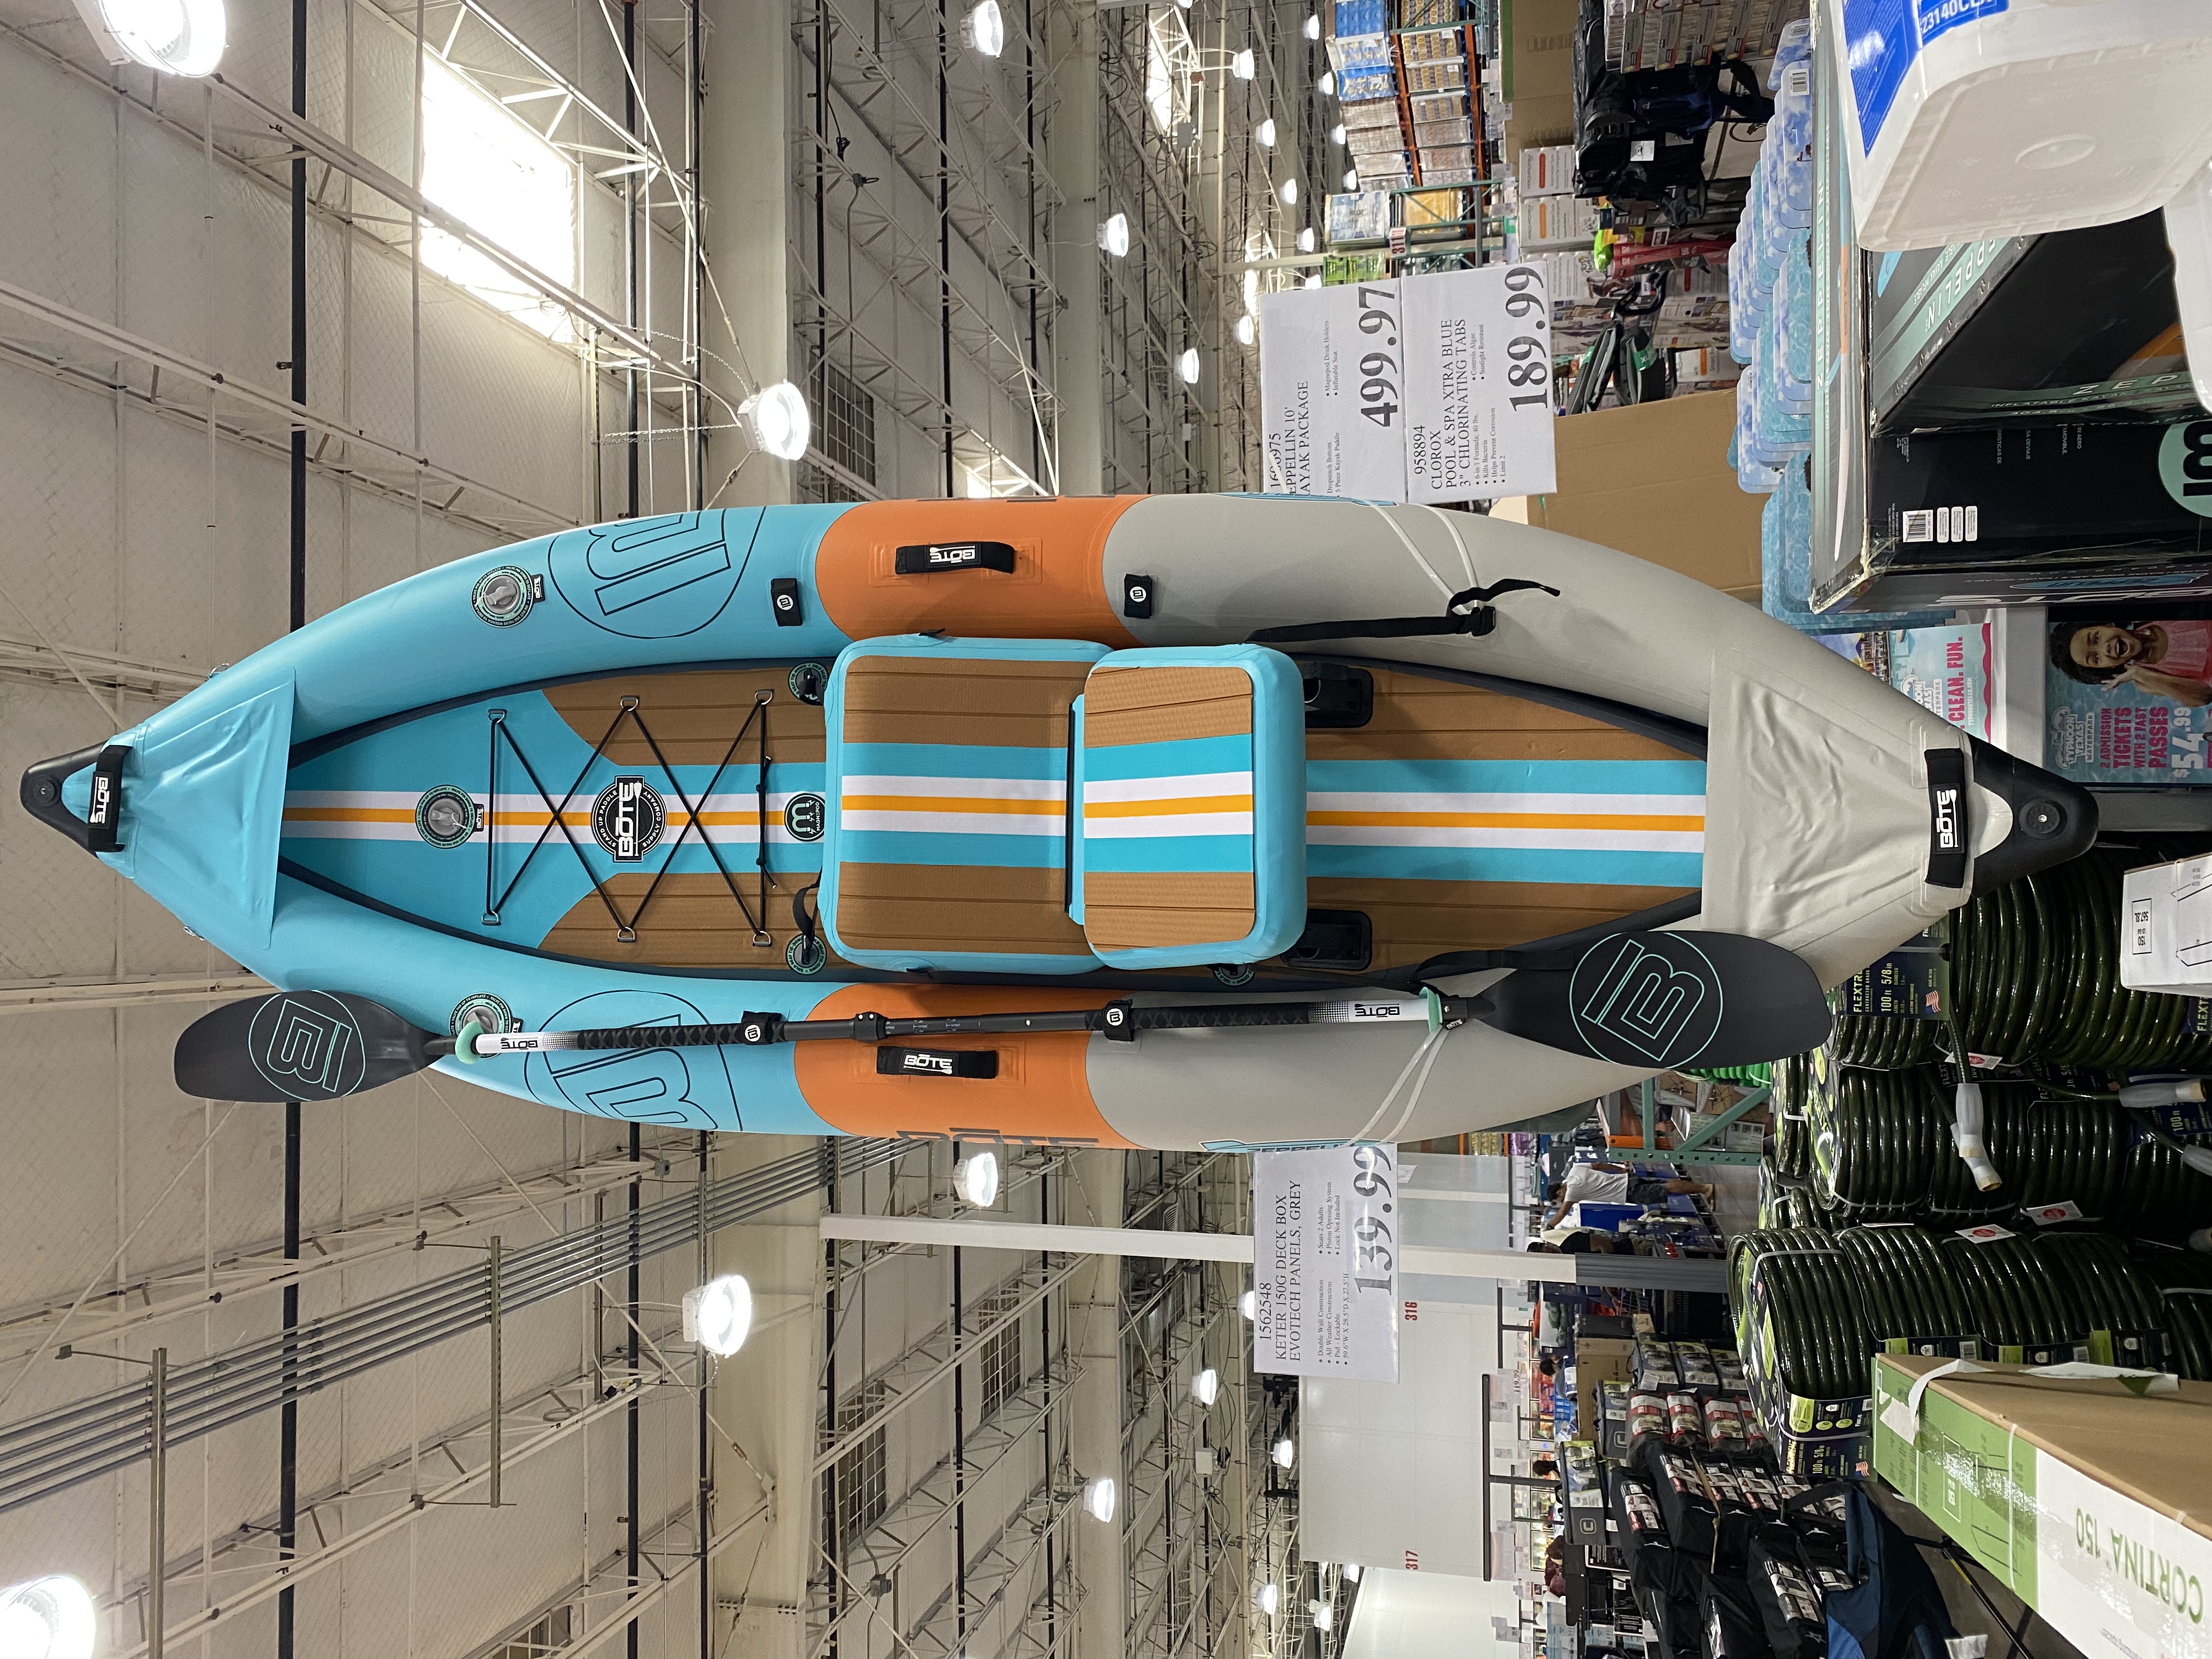 Bote Zeppelin 10' Inflatable Kayak $499.97 @Costco B&M YMMV clearance